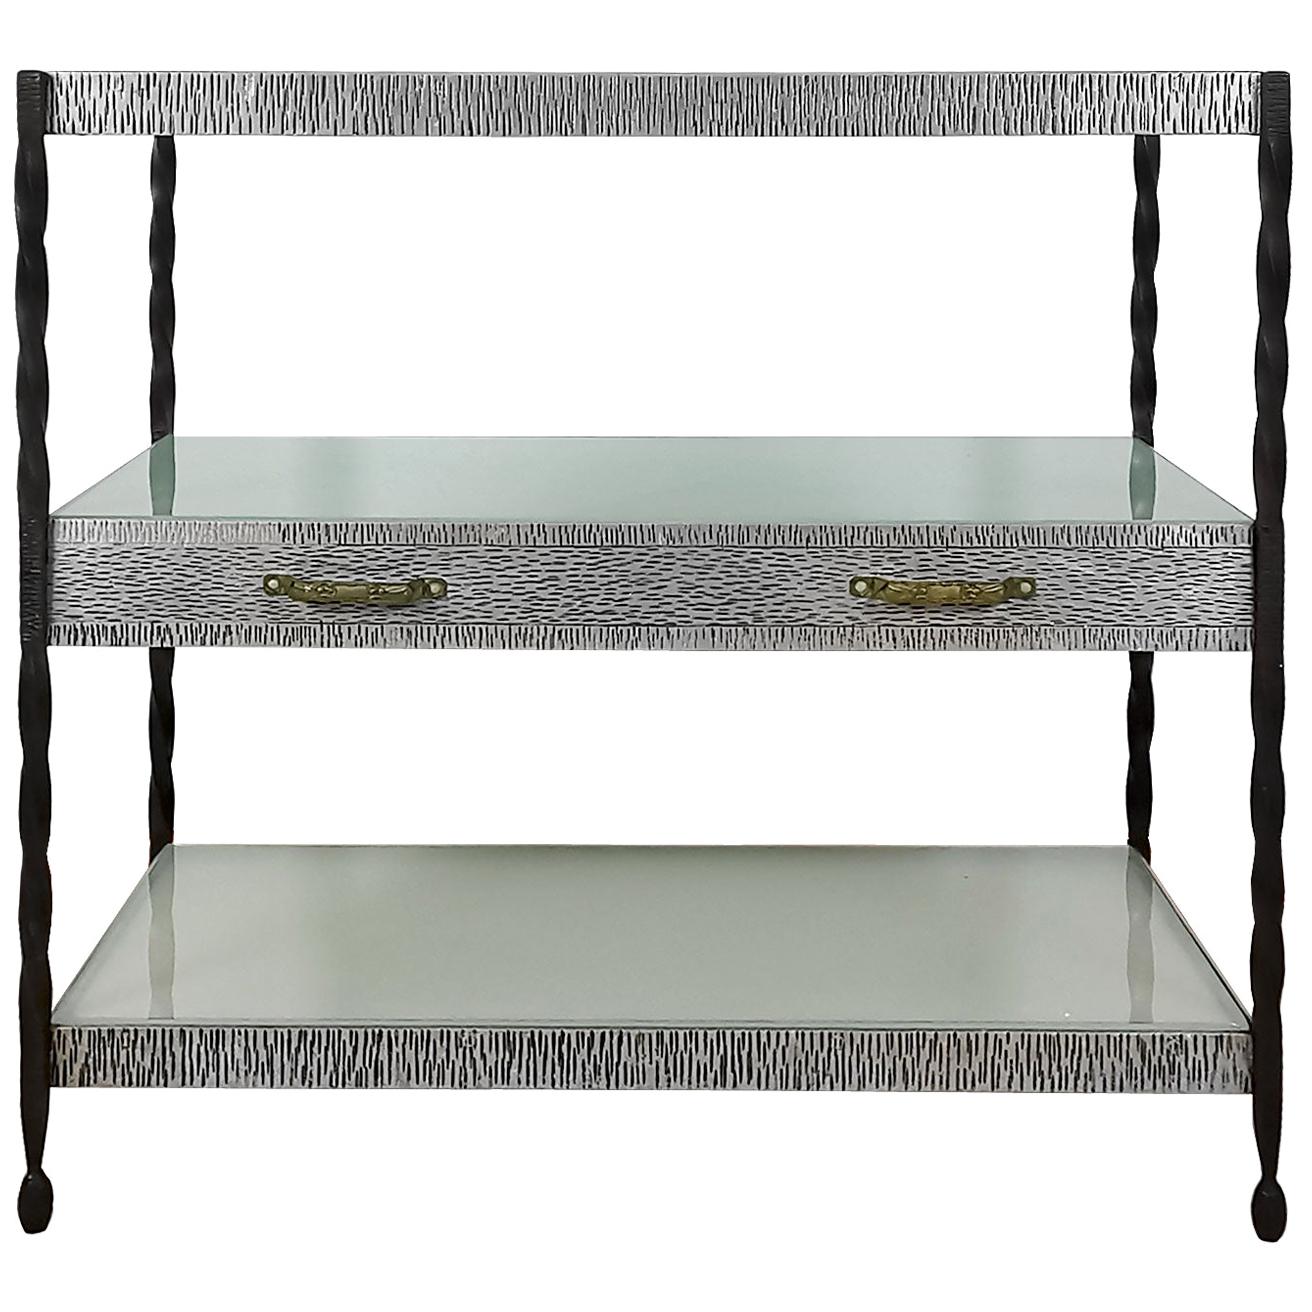 Art Deco Center Shelving Unit, Wrought Iron, Metal, Brass and Glass - France